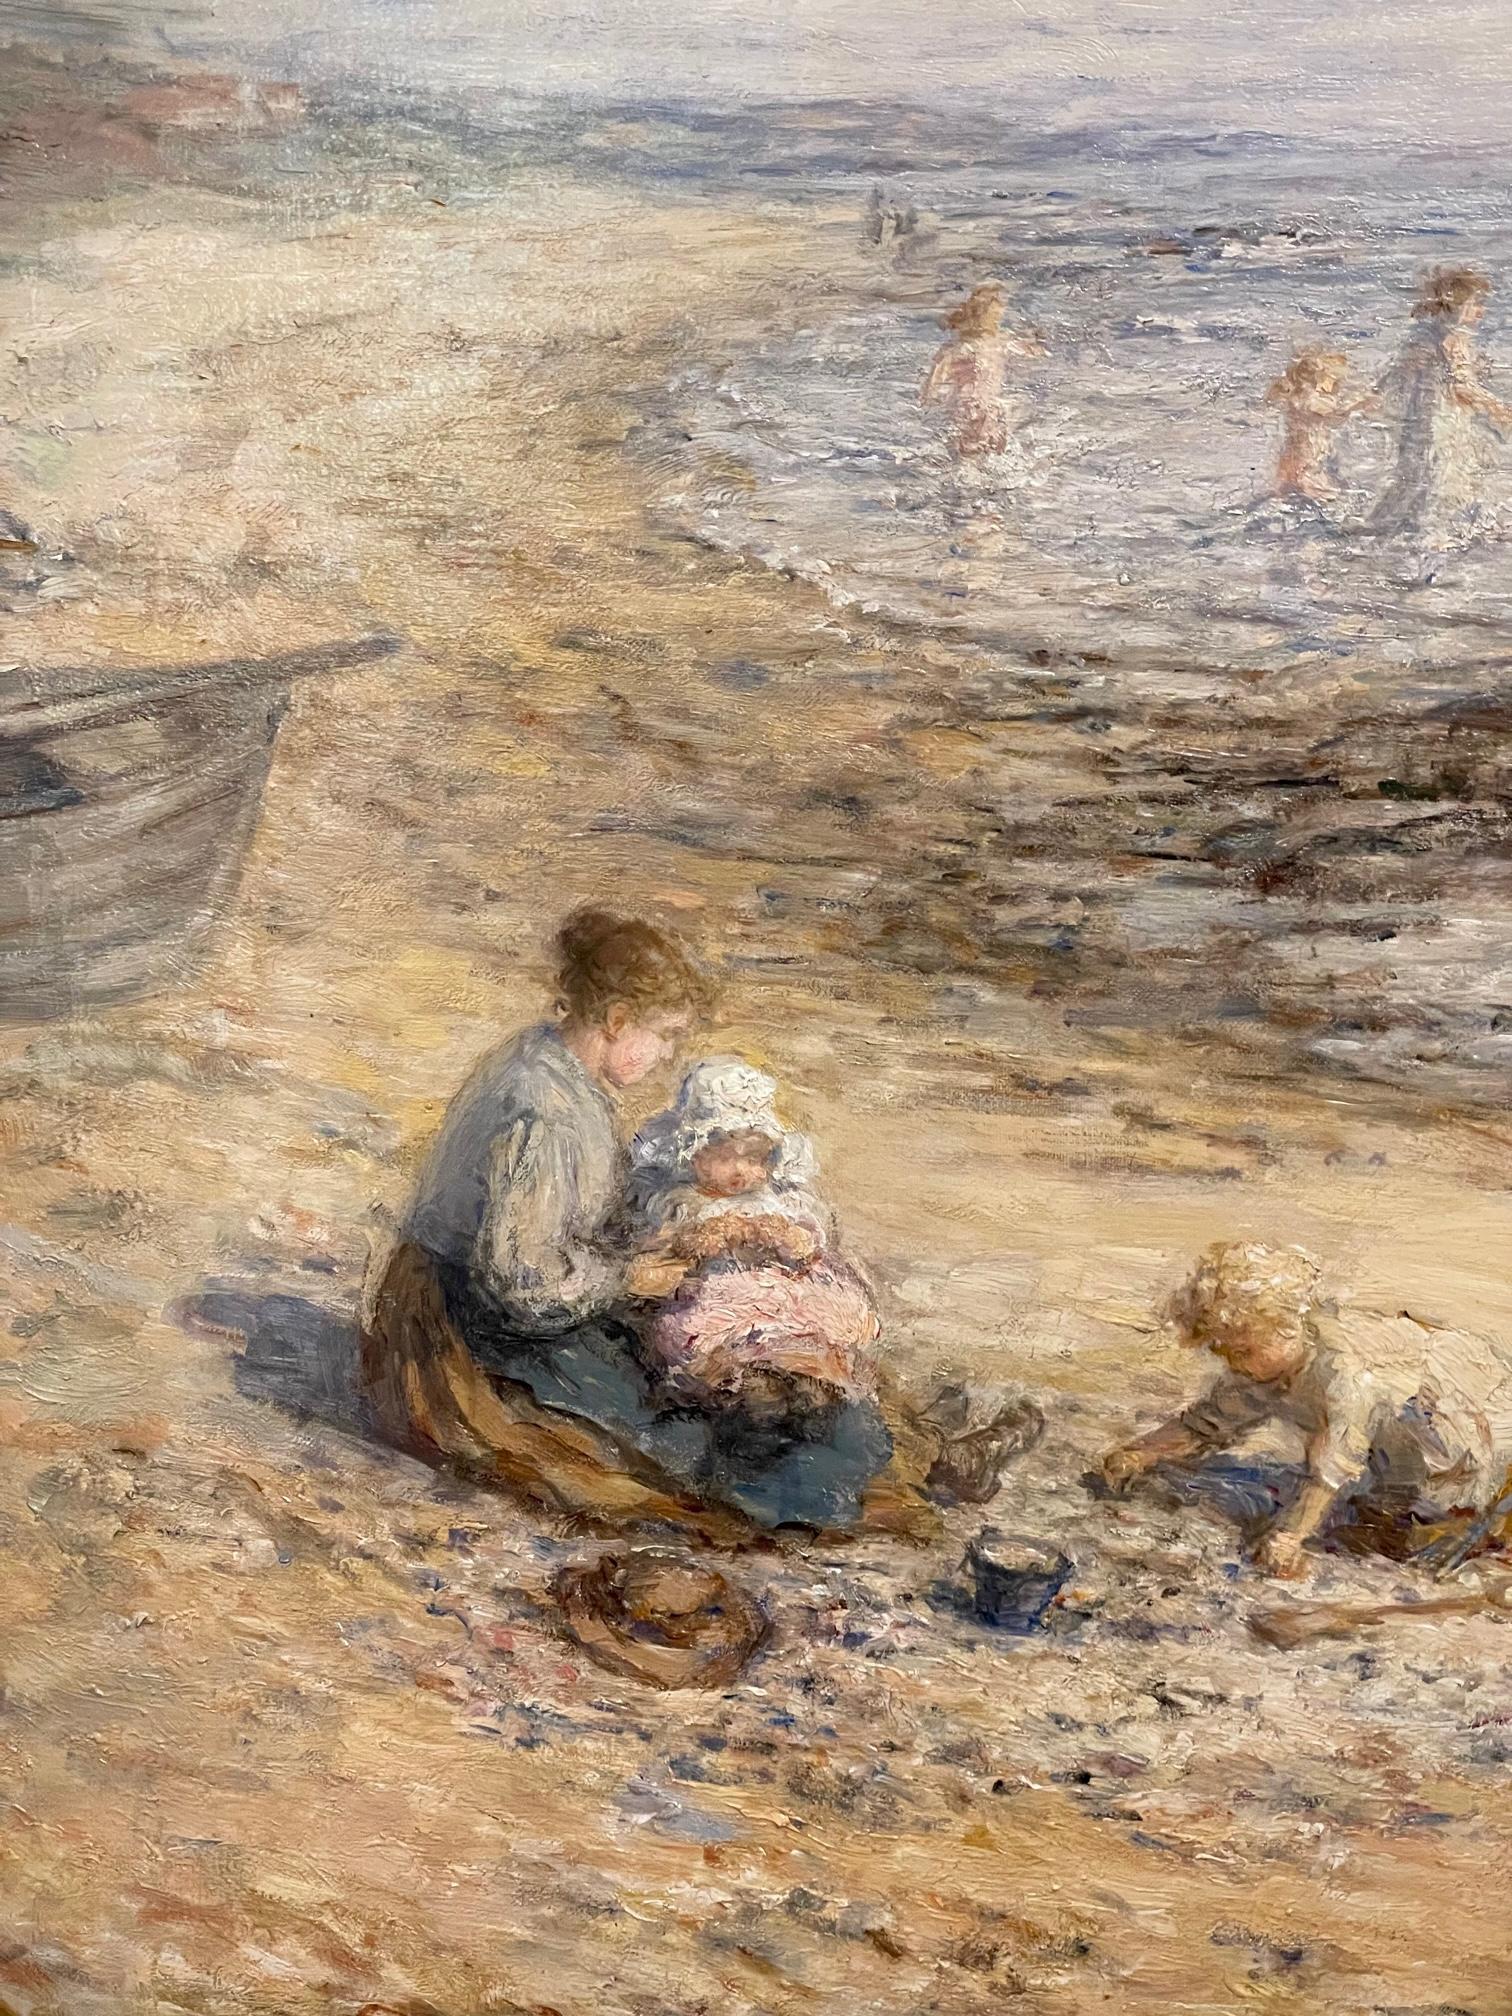 'By the Seaside' is an impressive painting by Scottish artist Hugh Cameron (1835-1918), in a style he perfected.  The fine figurative impressions of mother and child, children playing in  the pale blue water by a coastal Scottish beach are signature